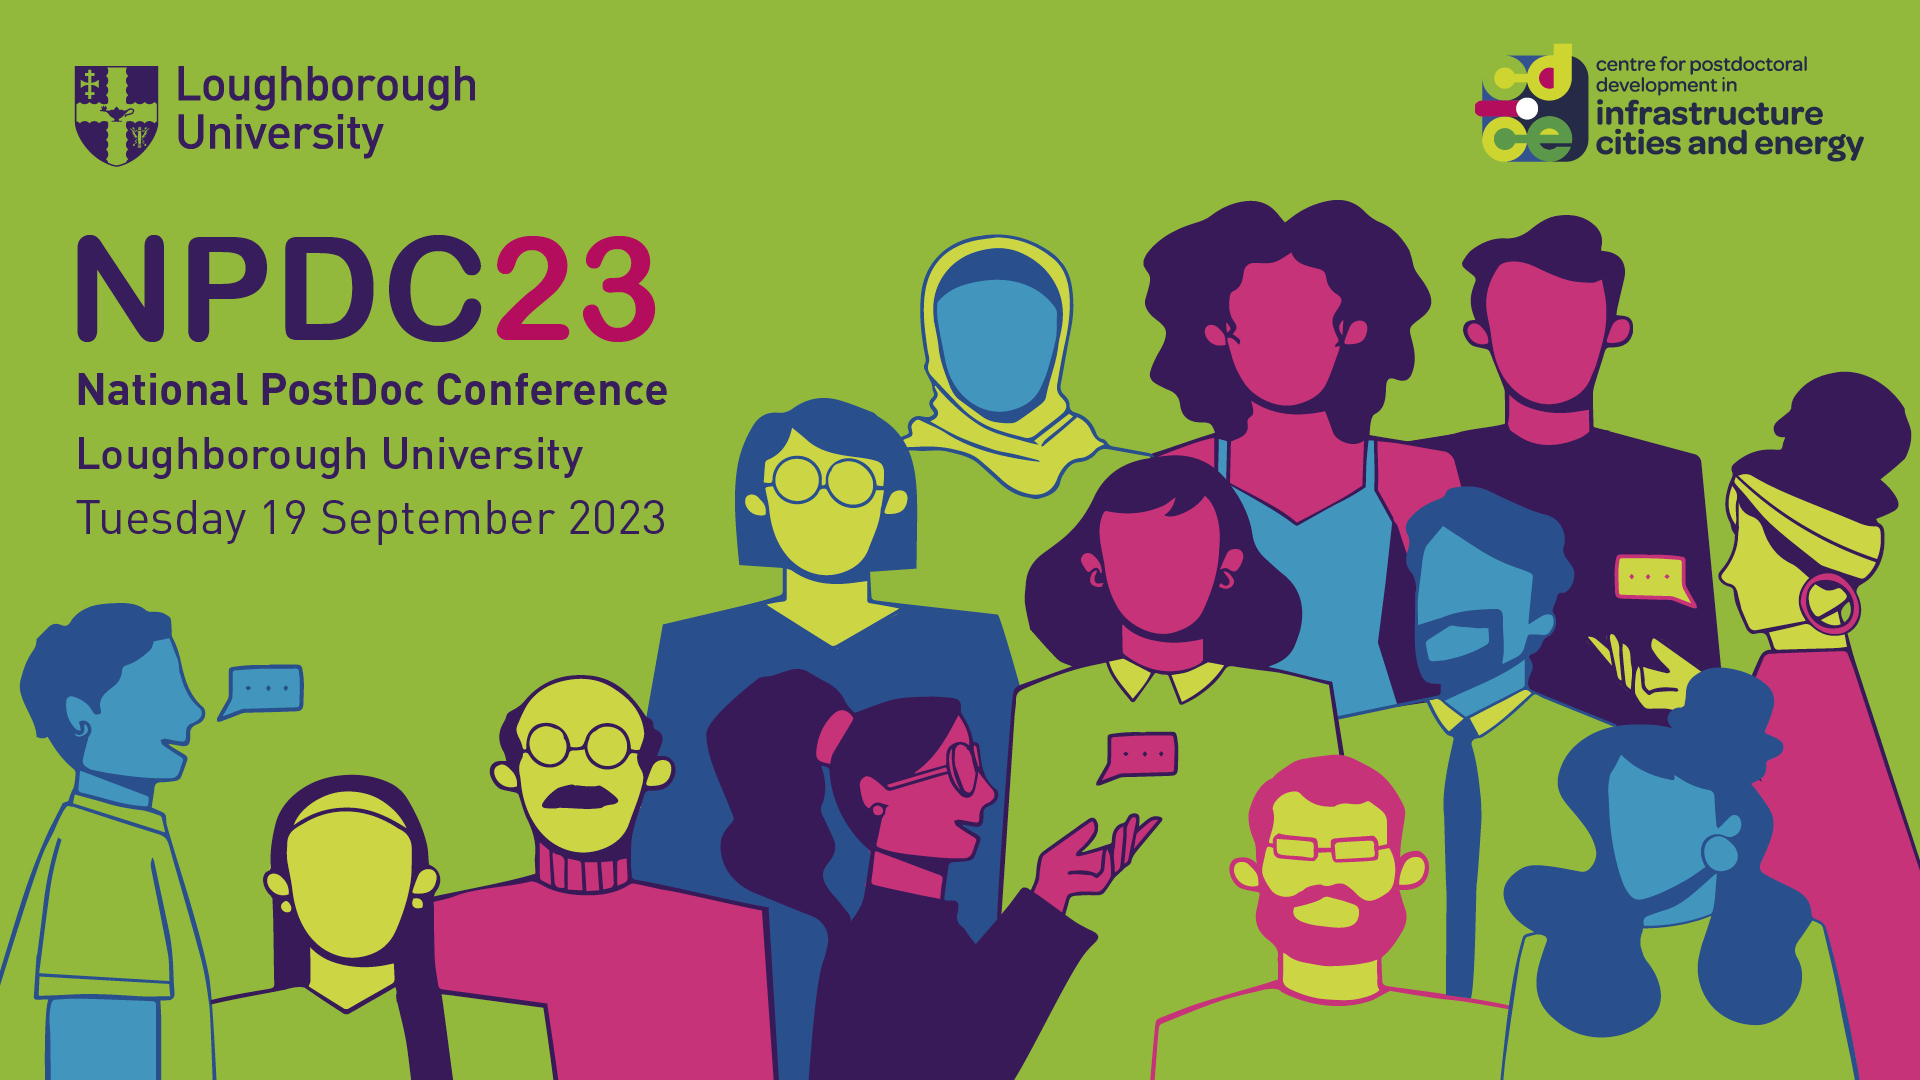 NPDC23 is coming to Loughborough University!